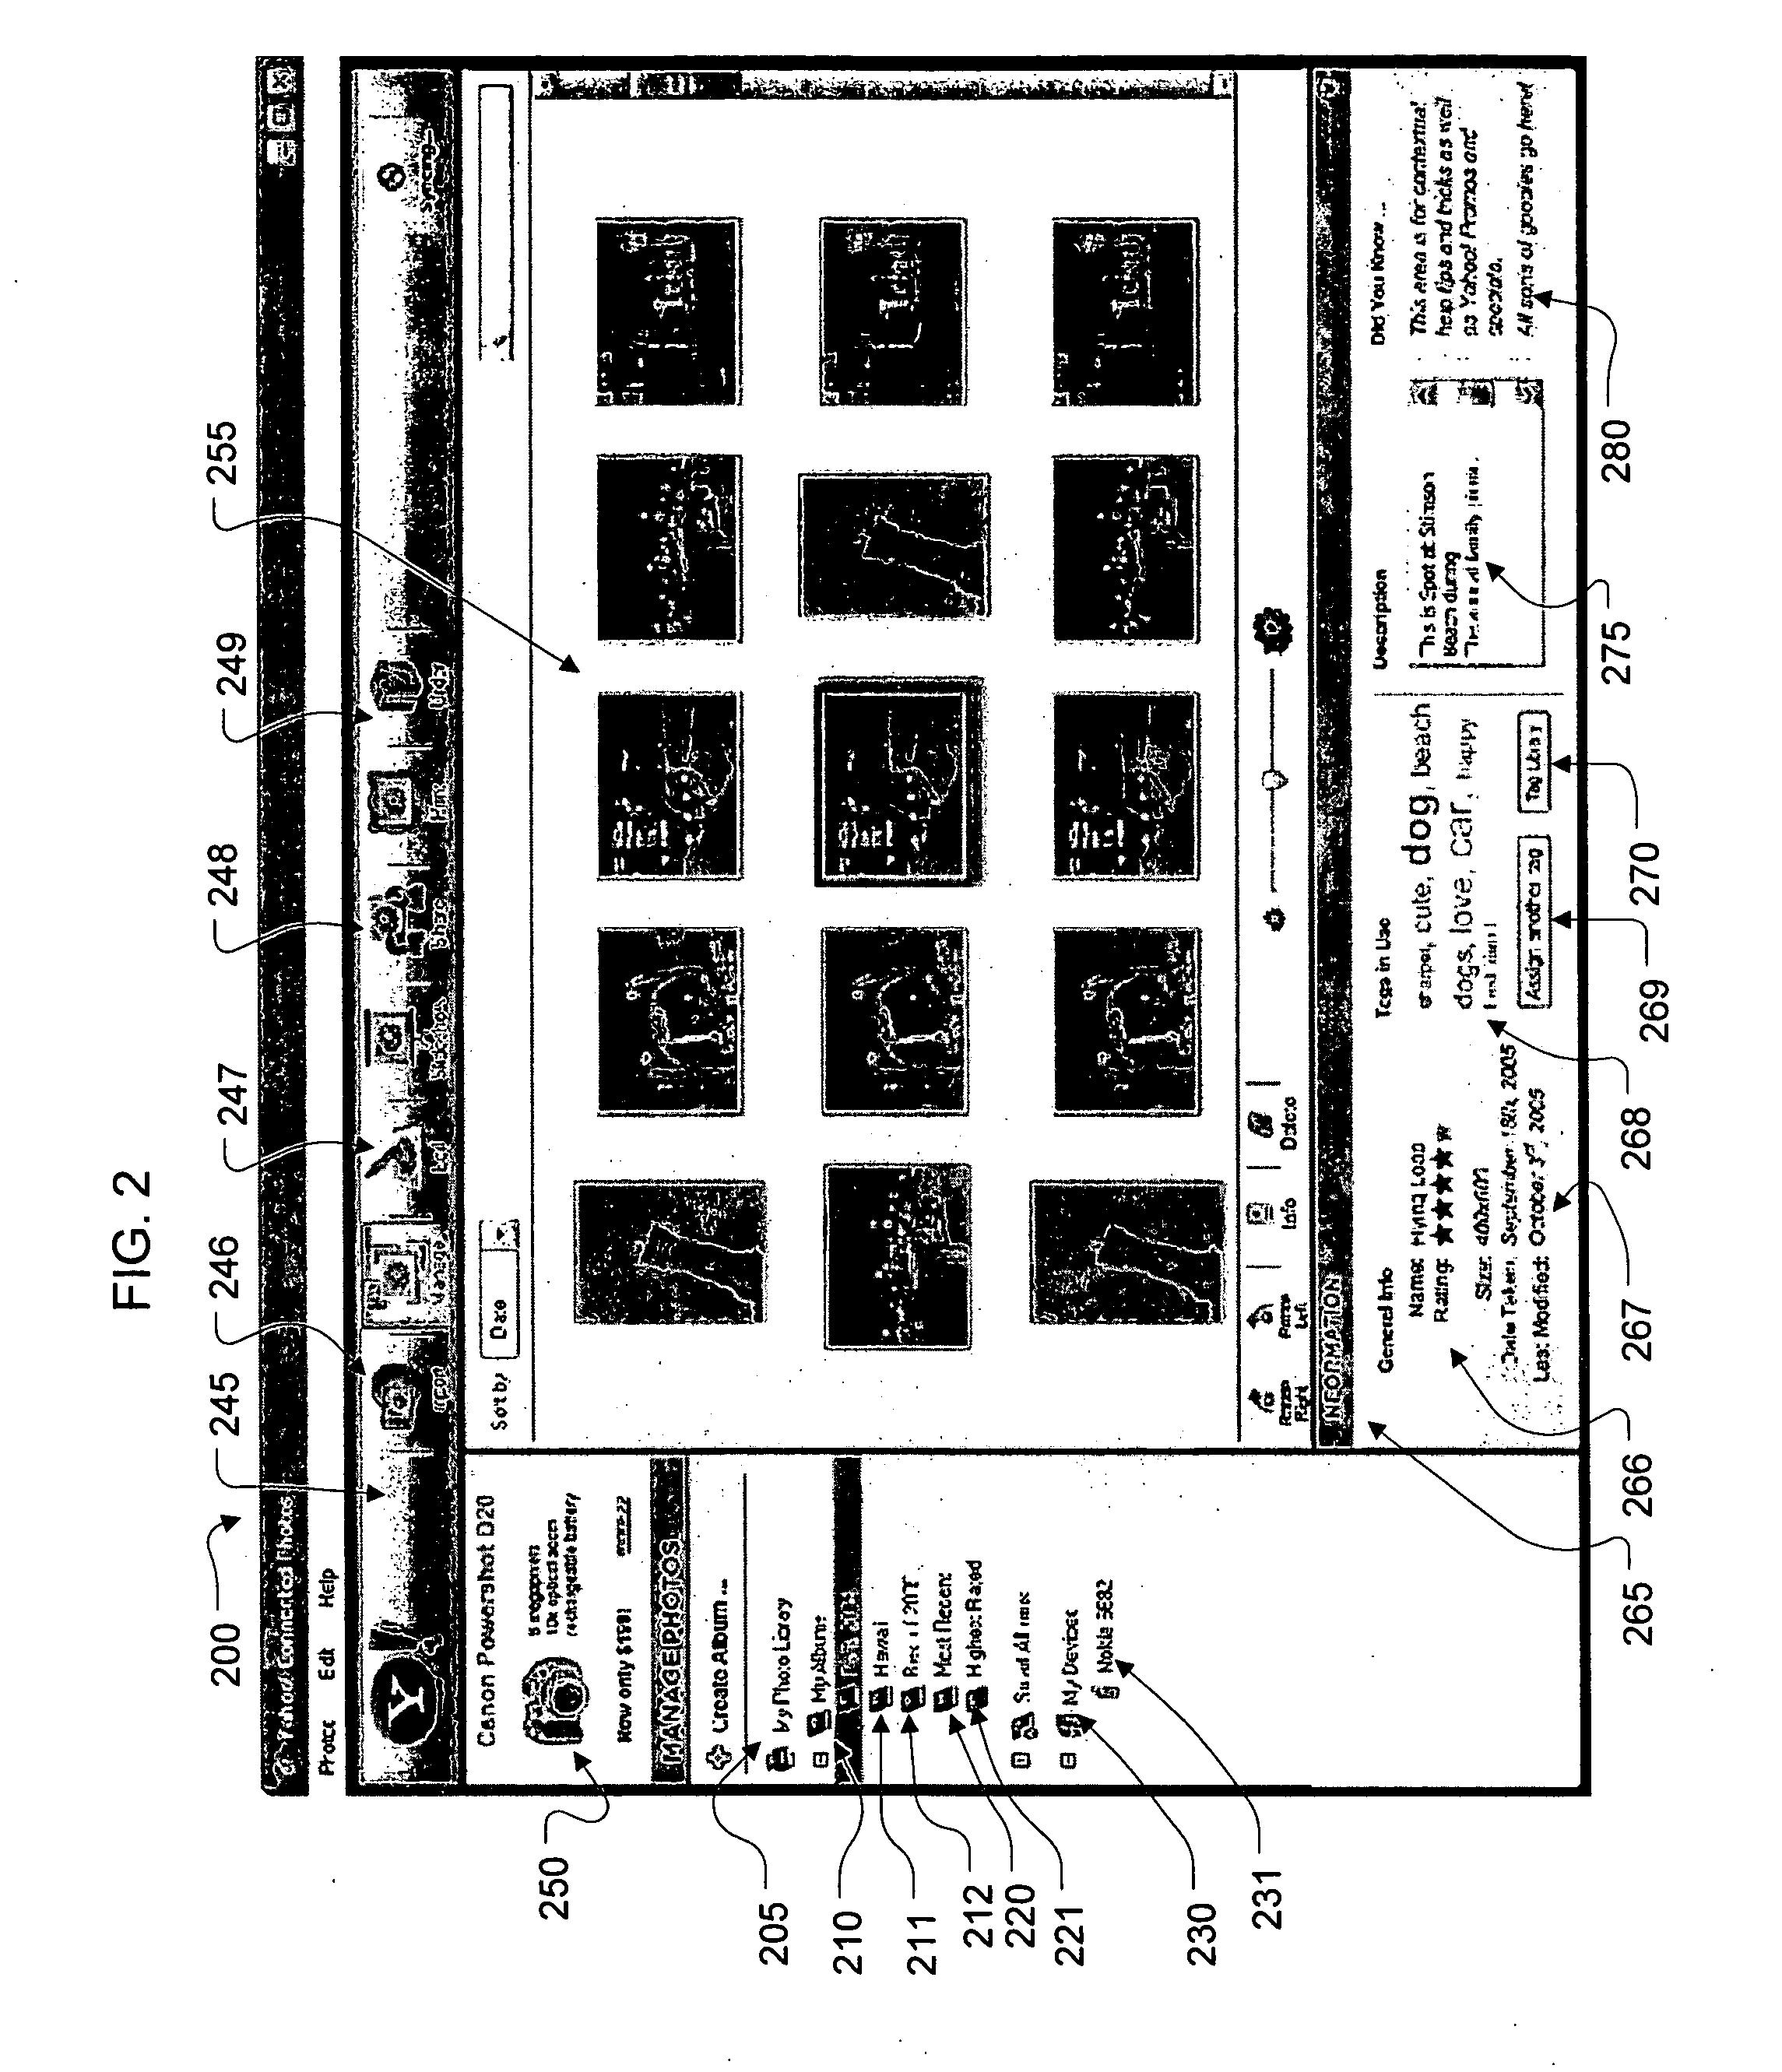 Synchronizing image data among applications and devices